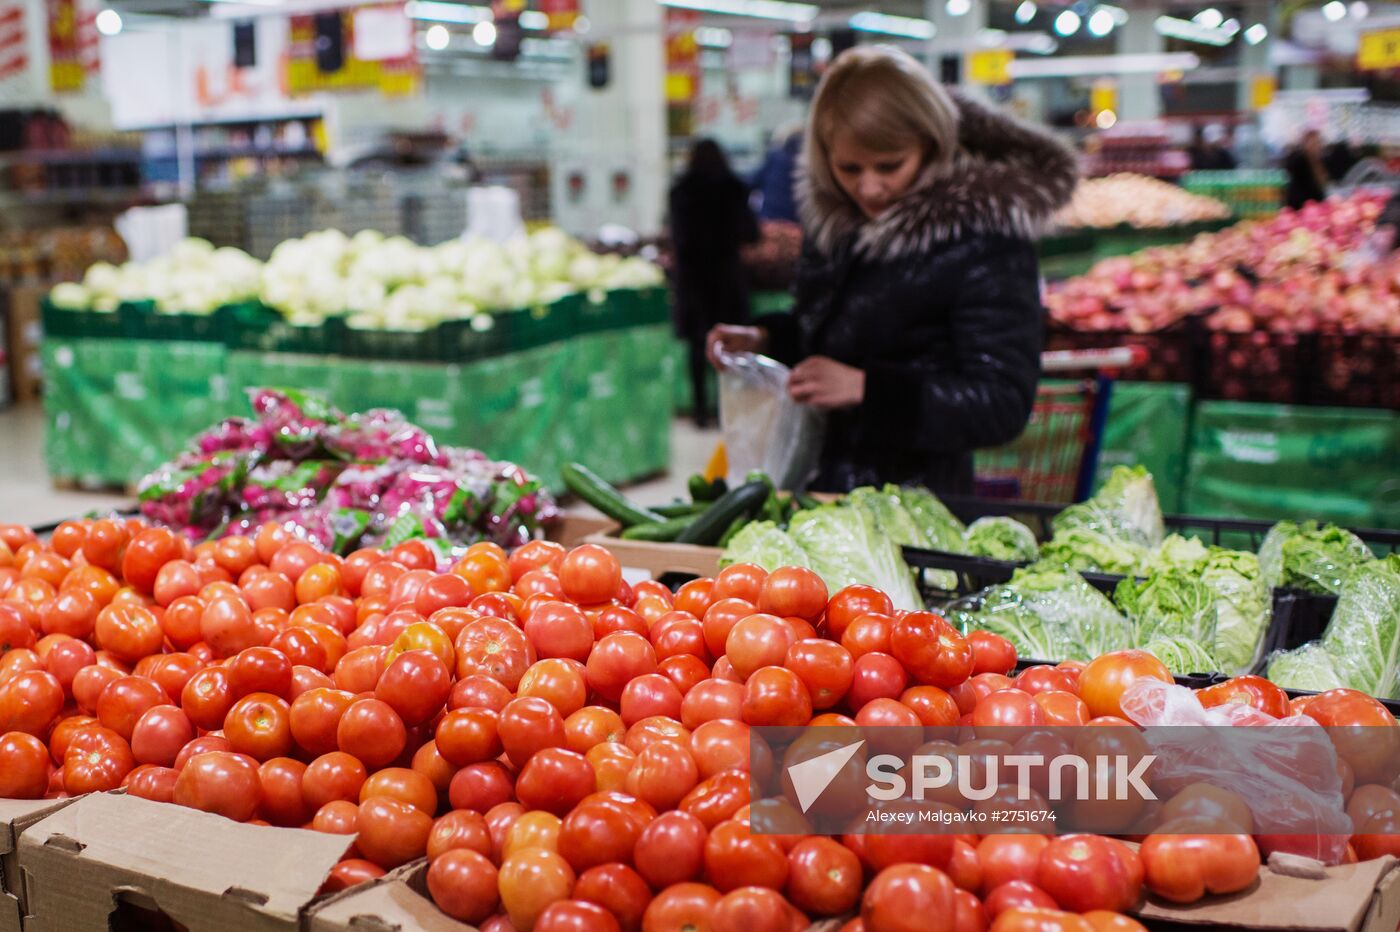 Russia bans imports of fruits, vegetables from Turkey